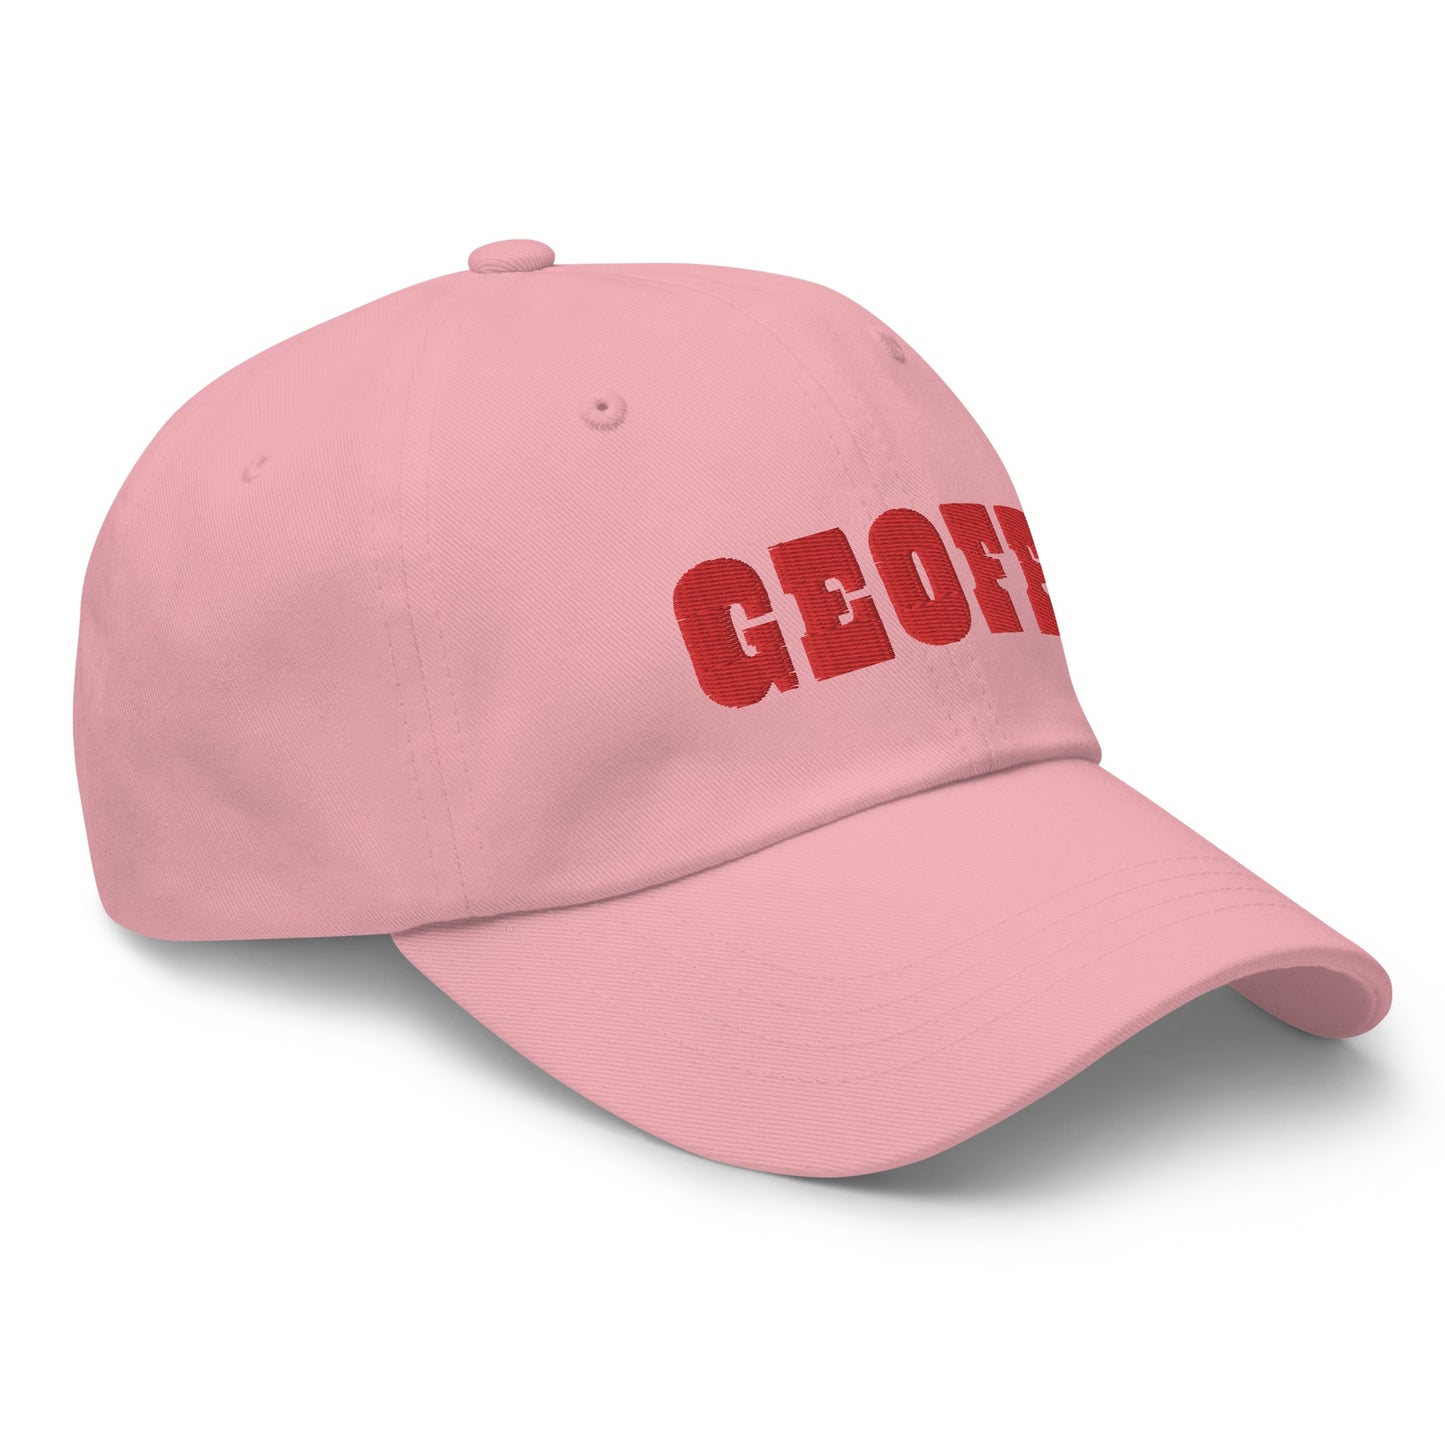 Obitchuary Geoff Classic Dad Hat